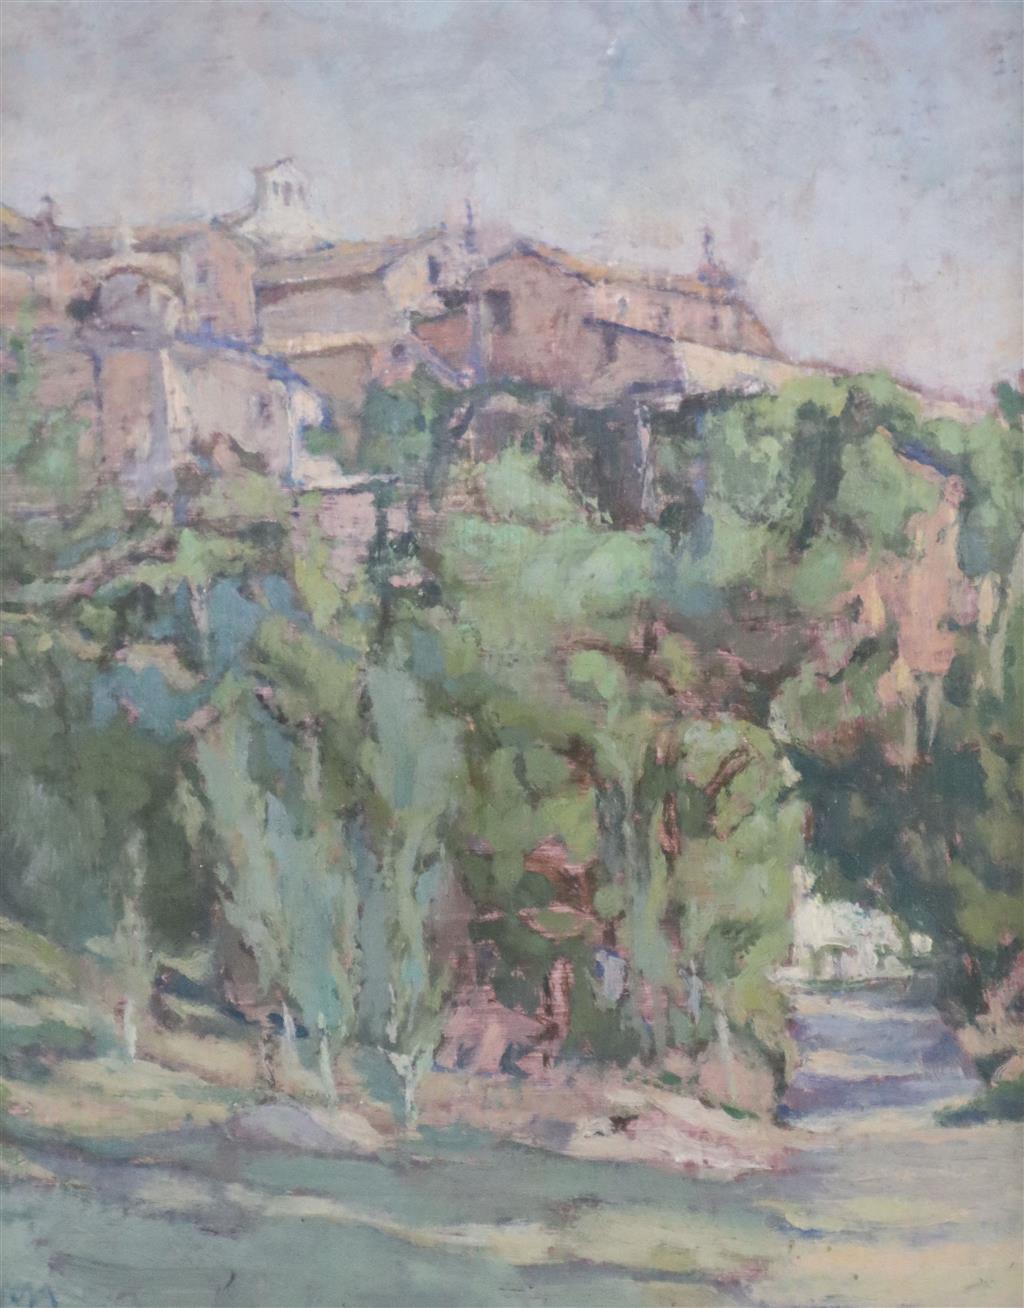 Diana Armfield (1920-), oil on board, Orvieto from below, initialled and inscribed verso, 20 x 16cm